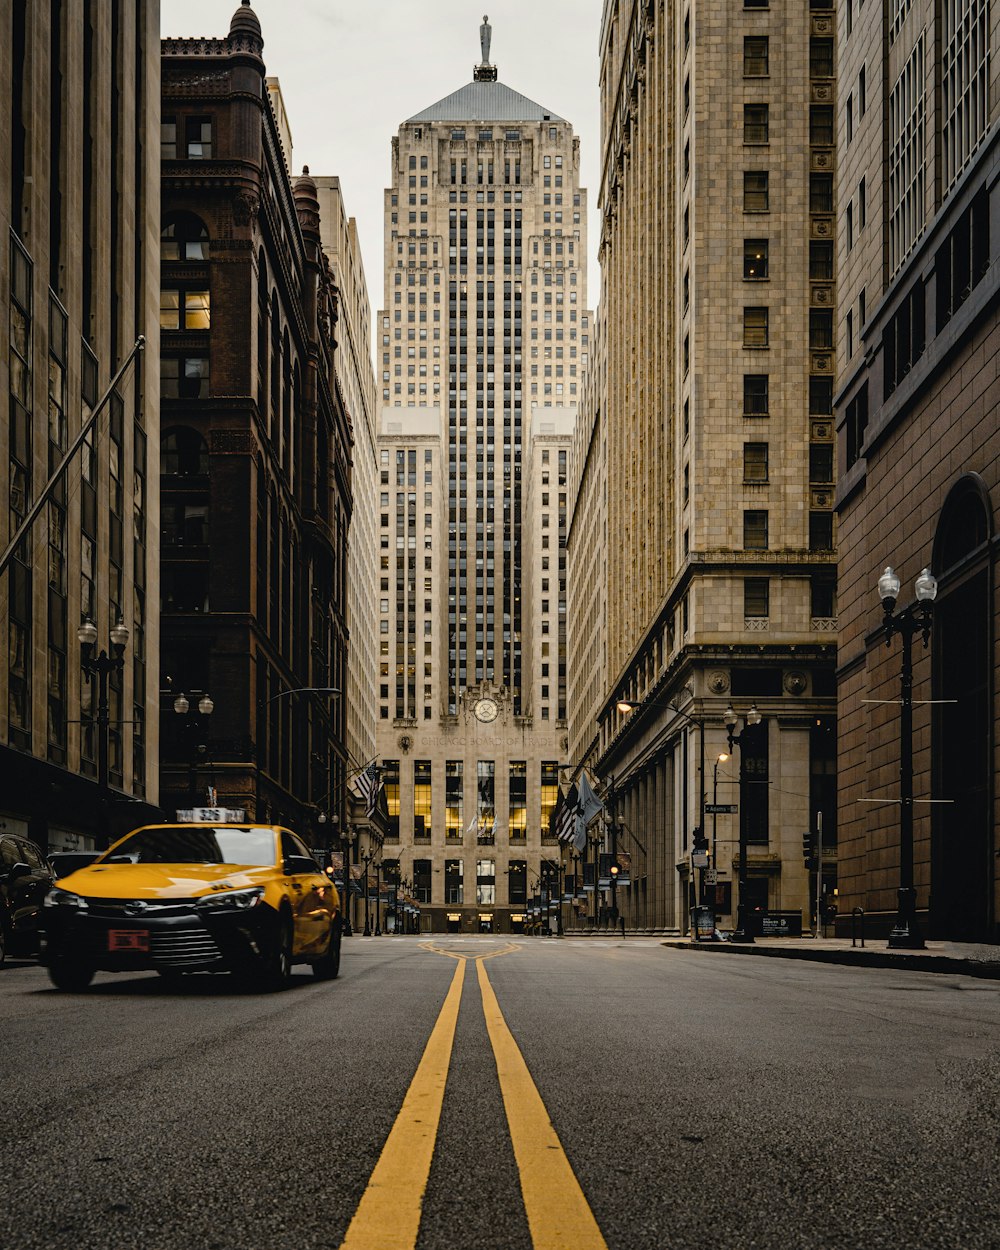 yellow car on road in between high rise buildings during daytime